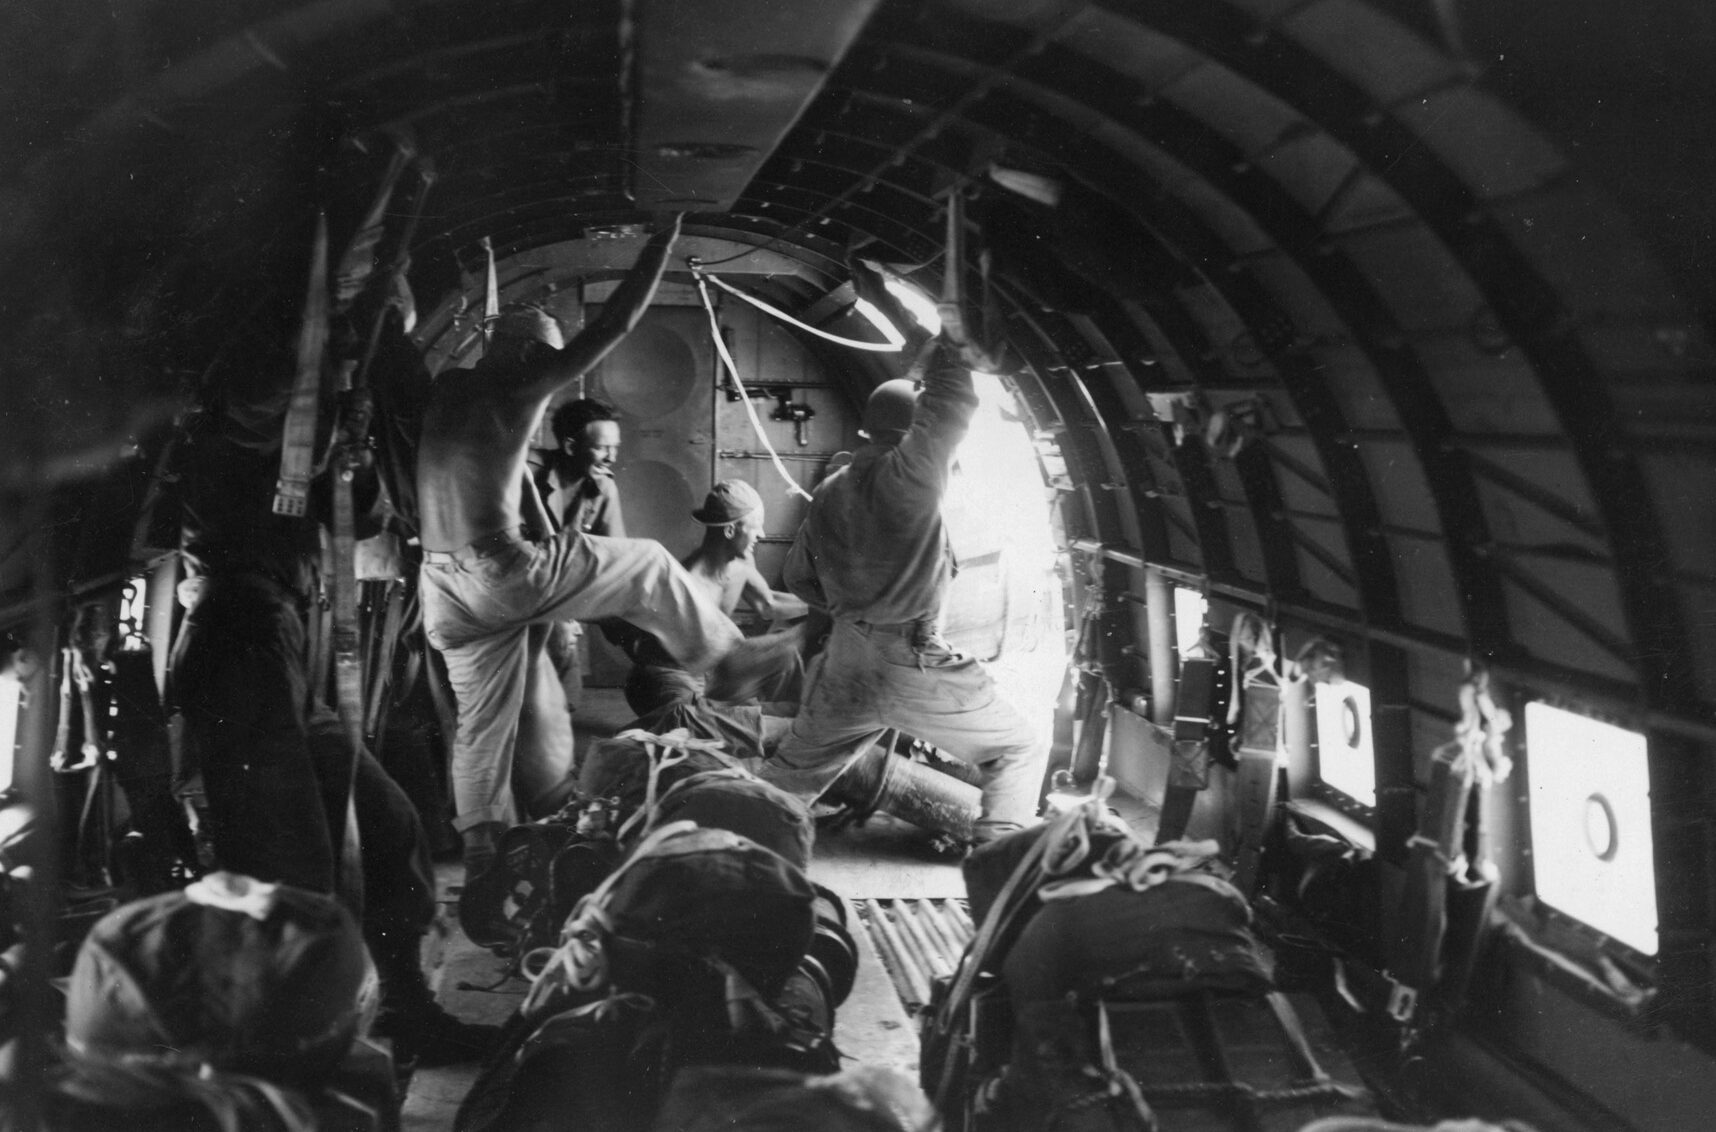 An American airman kicks a packet of supplies out the cargo door of a transport aircraft during the 38th Division offensive on the Bataan Peninsula. The difficult terrain required resupply by air, particularly during the struggle for control of Zig Zag Pass.